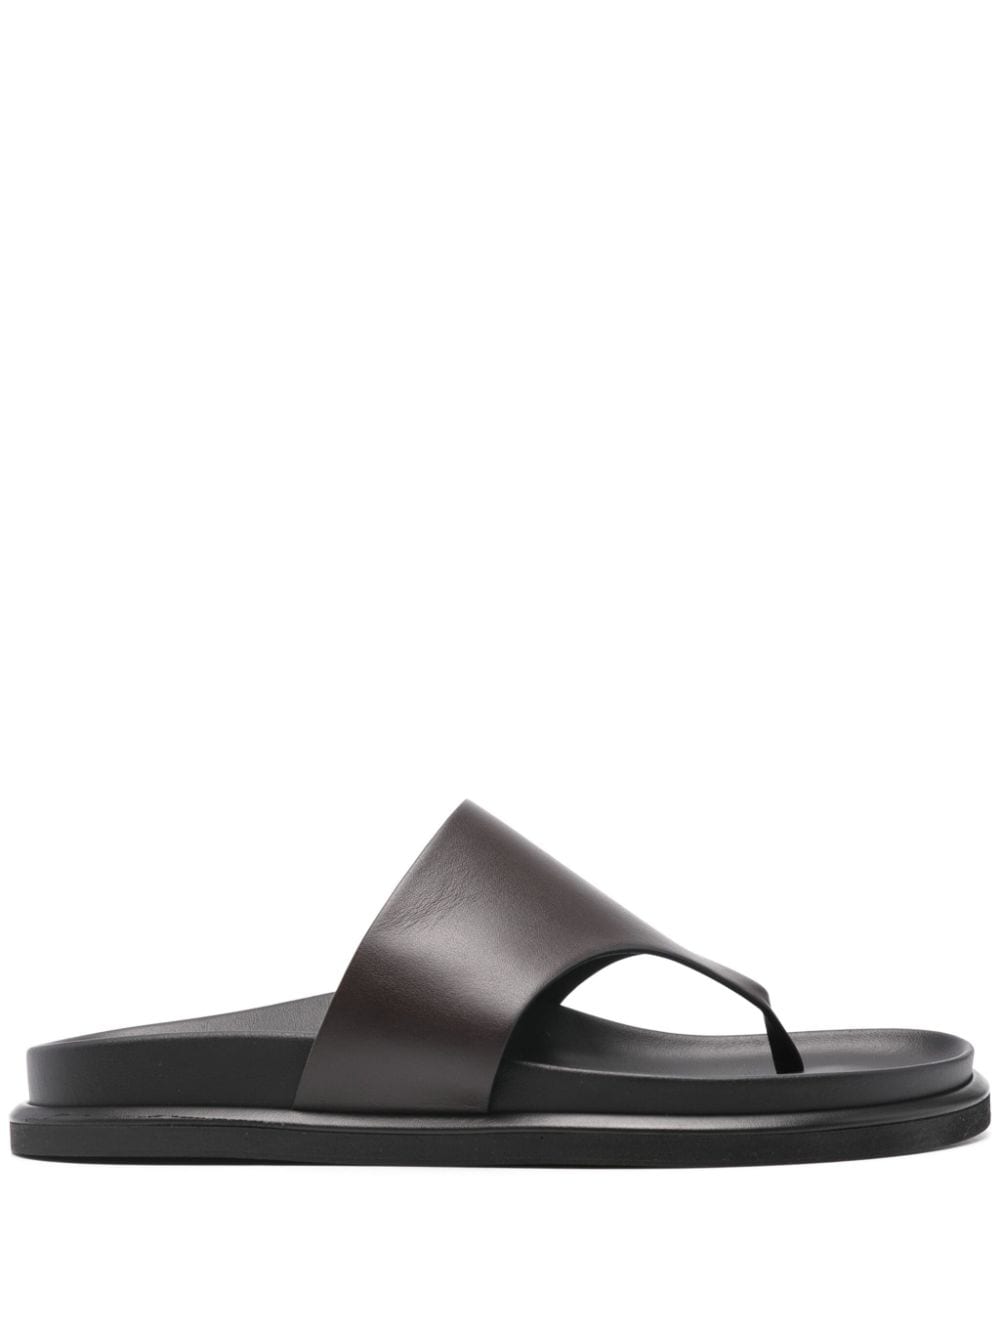 P.A.R.O.S.H. leather slip-on sandals - Brown